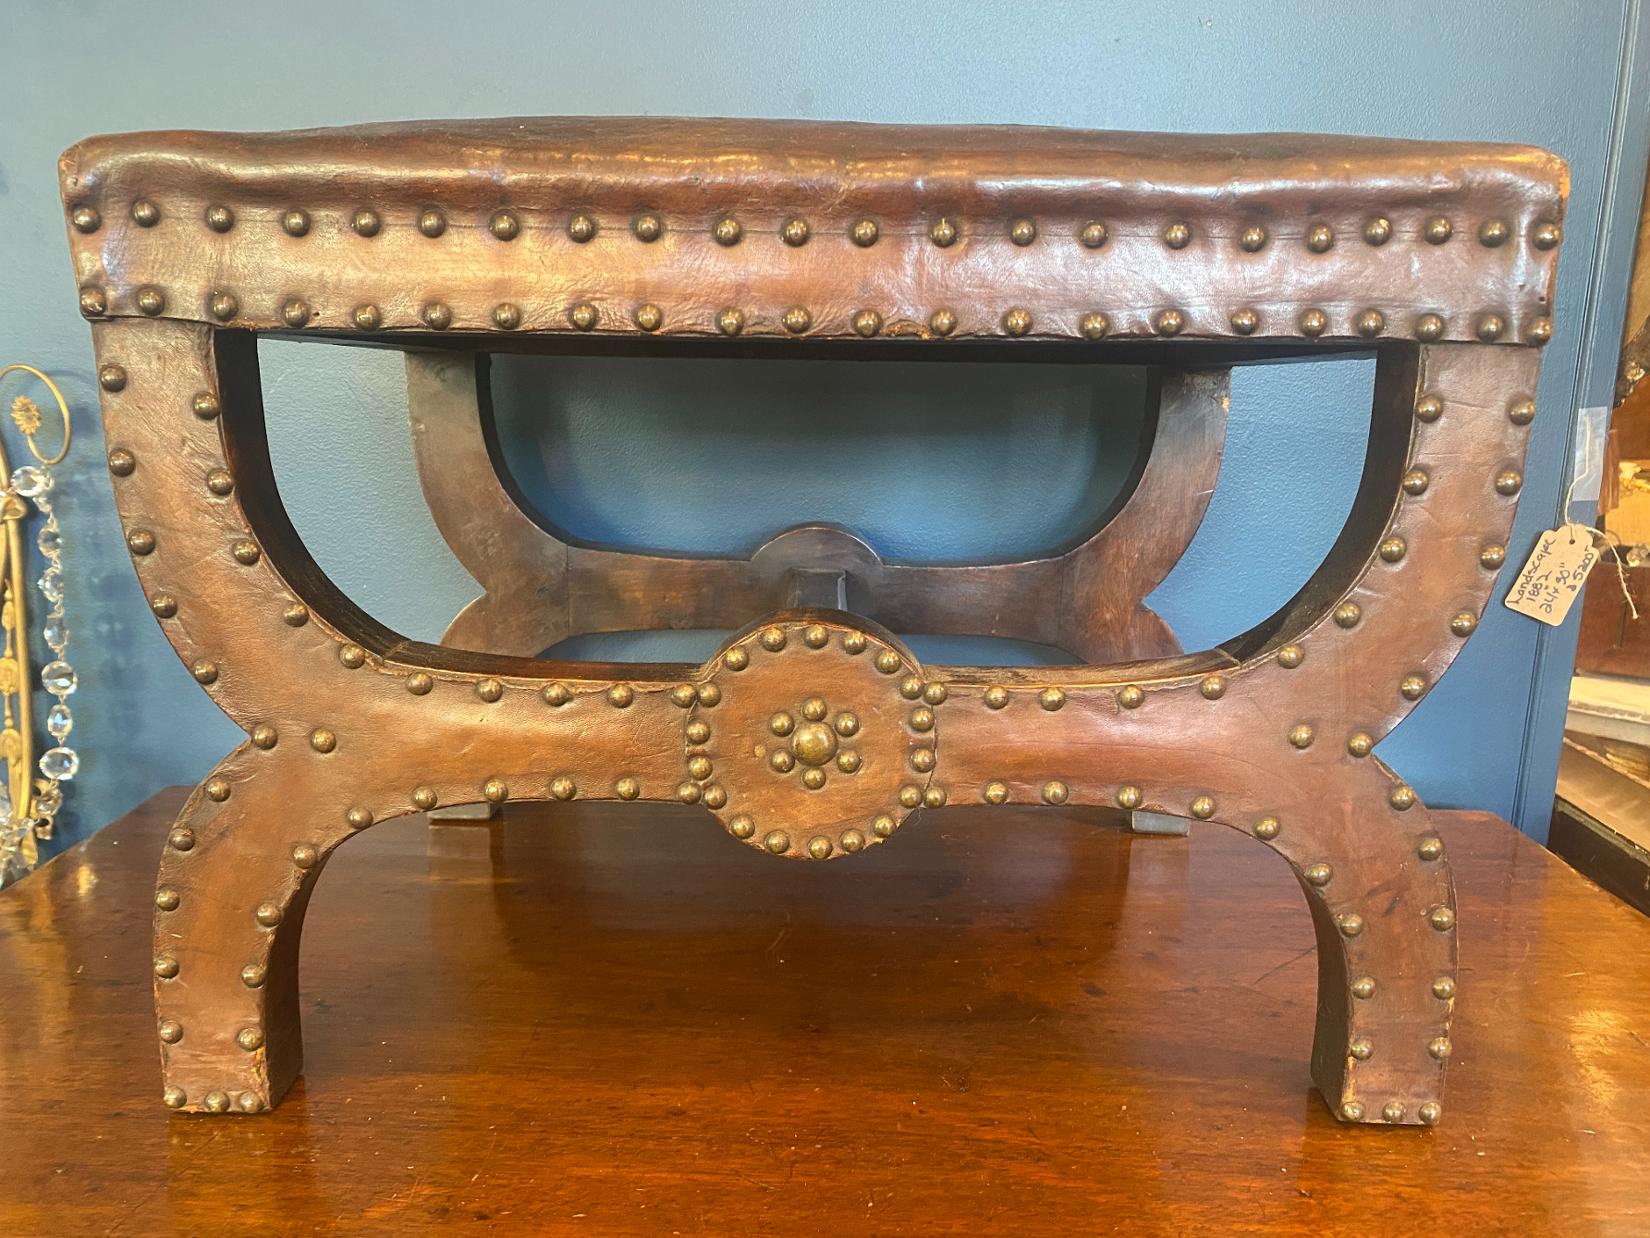 Late 19th century Arts & Crafts brown leather stool with brass nail head trim
Original leather covering is cracked but could be reupholstered or left as is to maintain antique look. Measures: 14.5